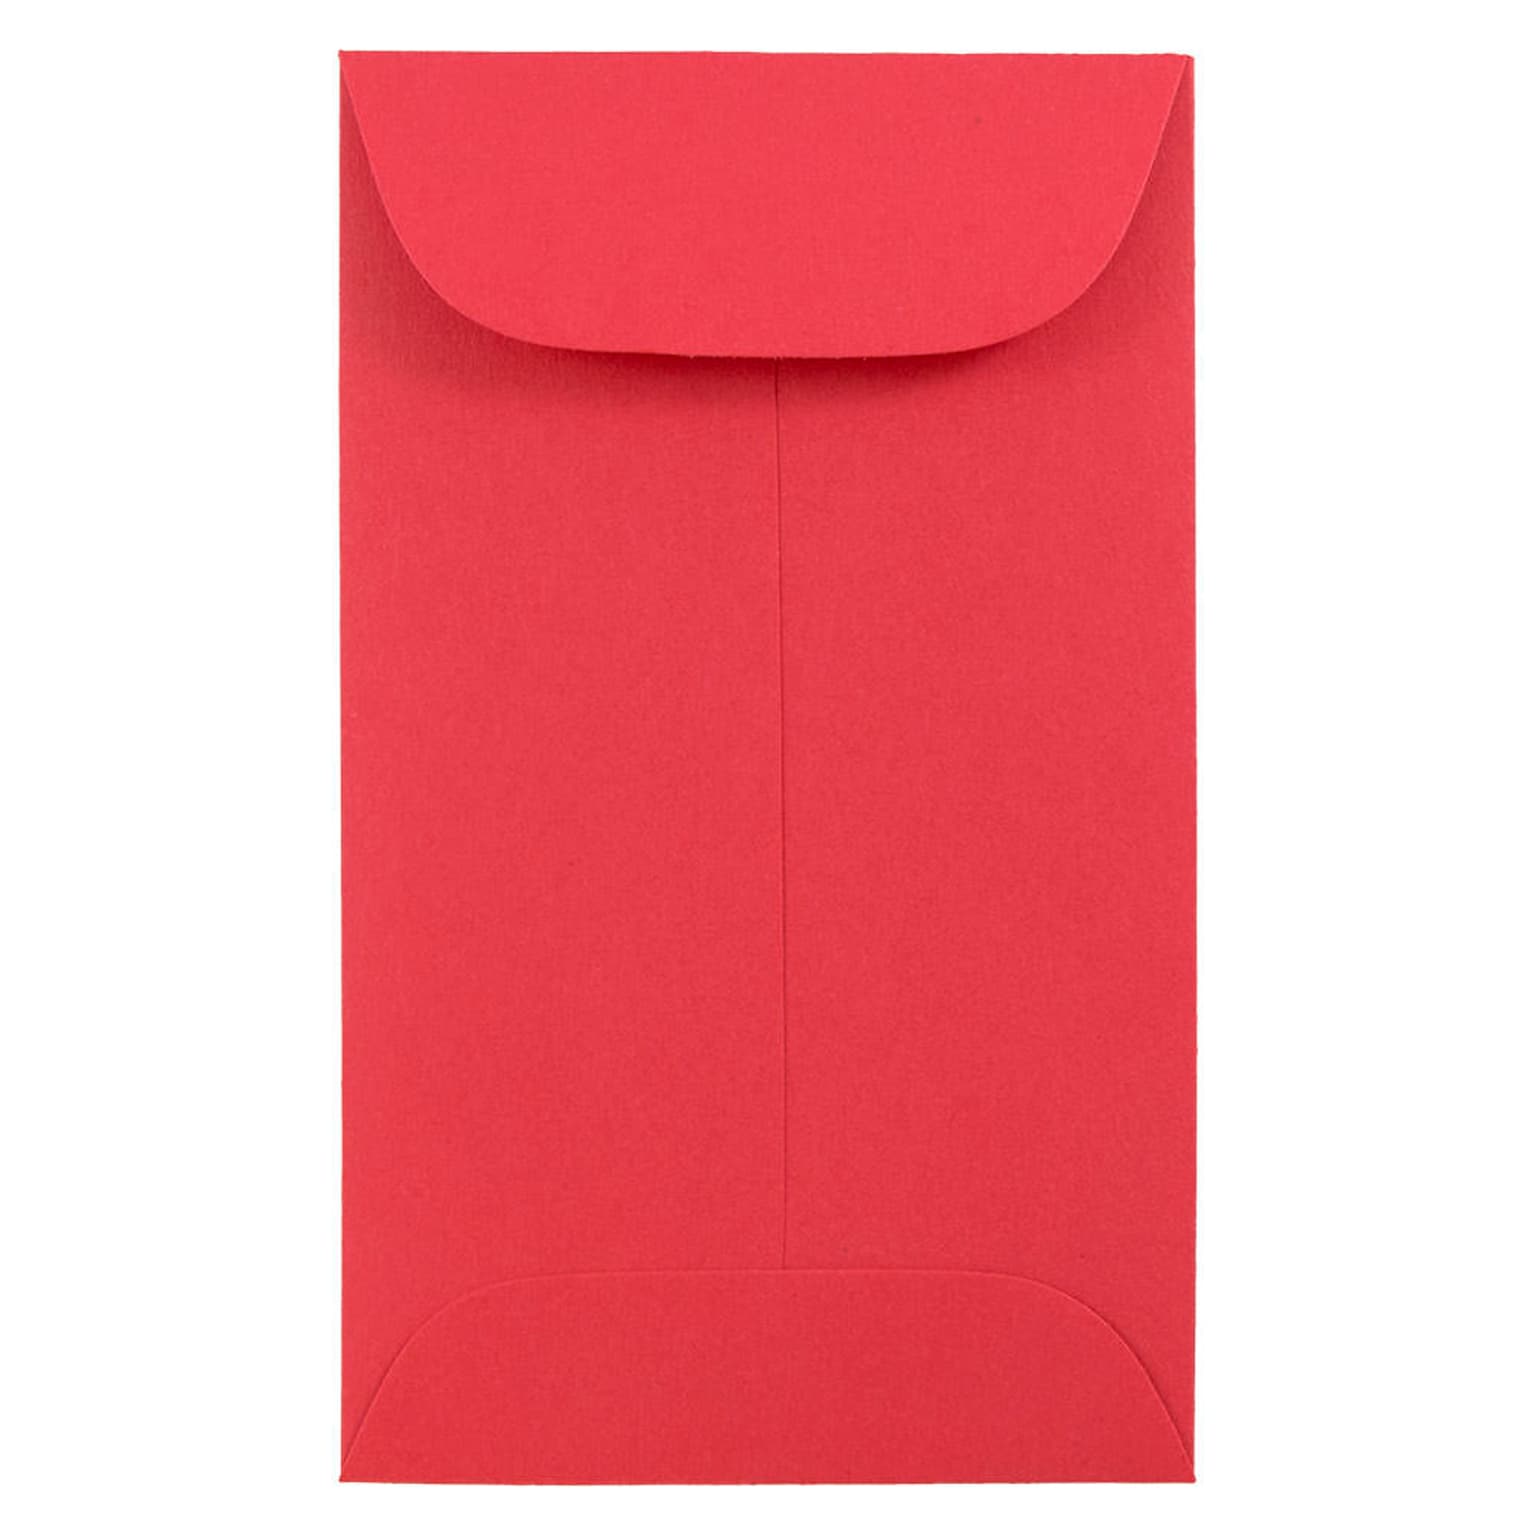 JAM Paper #3 Coin Business Colored Envelopes, 2.5 x 4.25, Red Recycled, 25/Pack (356730541)